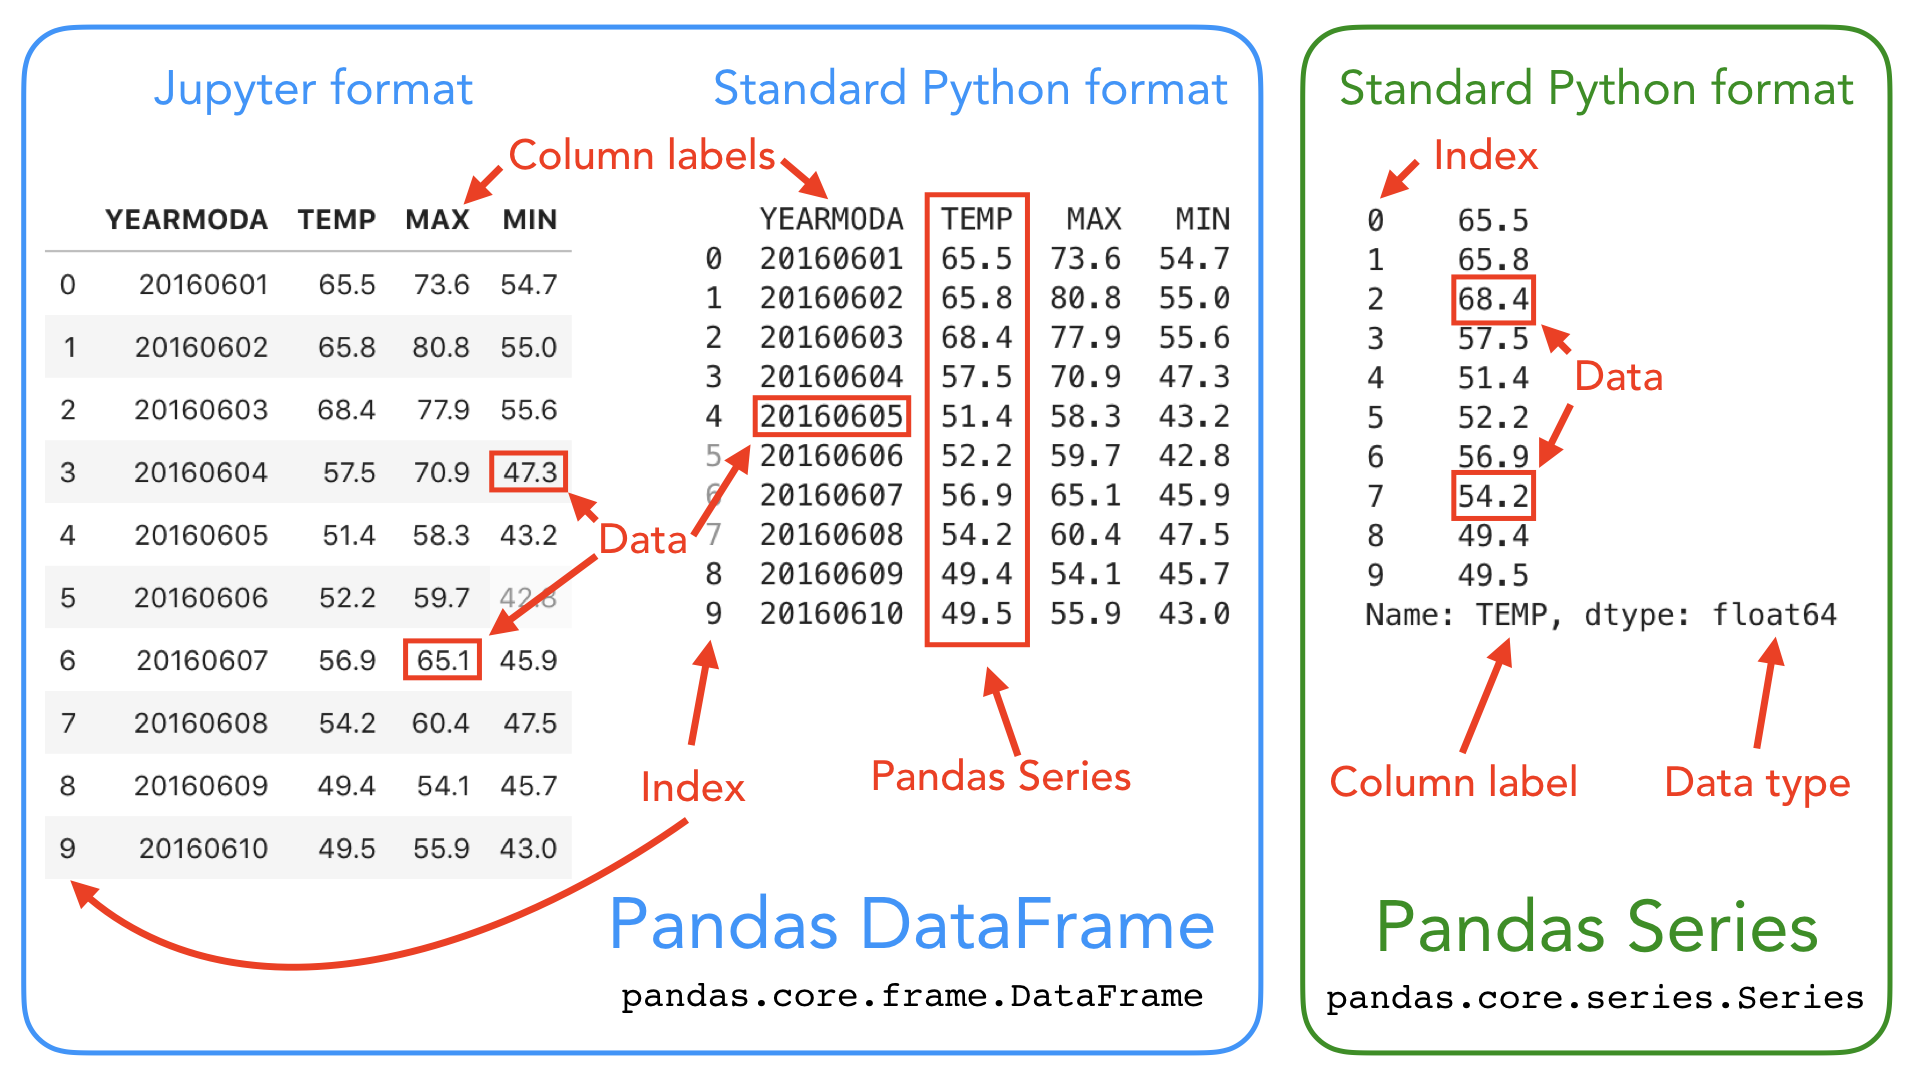 Figure 3.1. Illustration of pandas DaraFrame and pandas Series data structures. Pandas DataFrame is a 2-dimensional data structure used for storing and mainpulating table-like data (data with rows and columns). Pandas Series is a 1-dimensional data structure used for storing and manipulating an sequence of values.